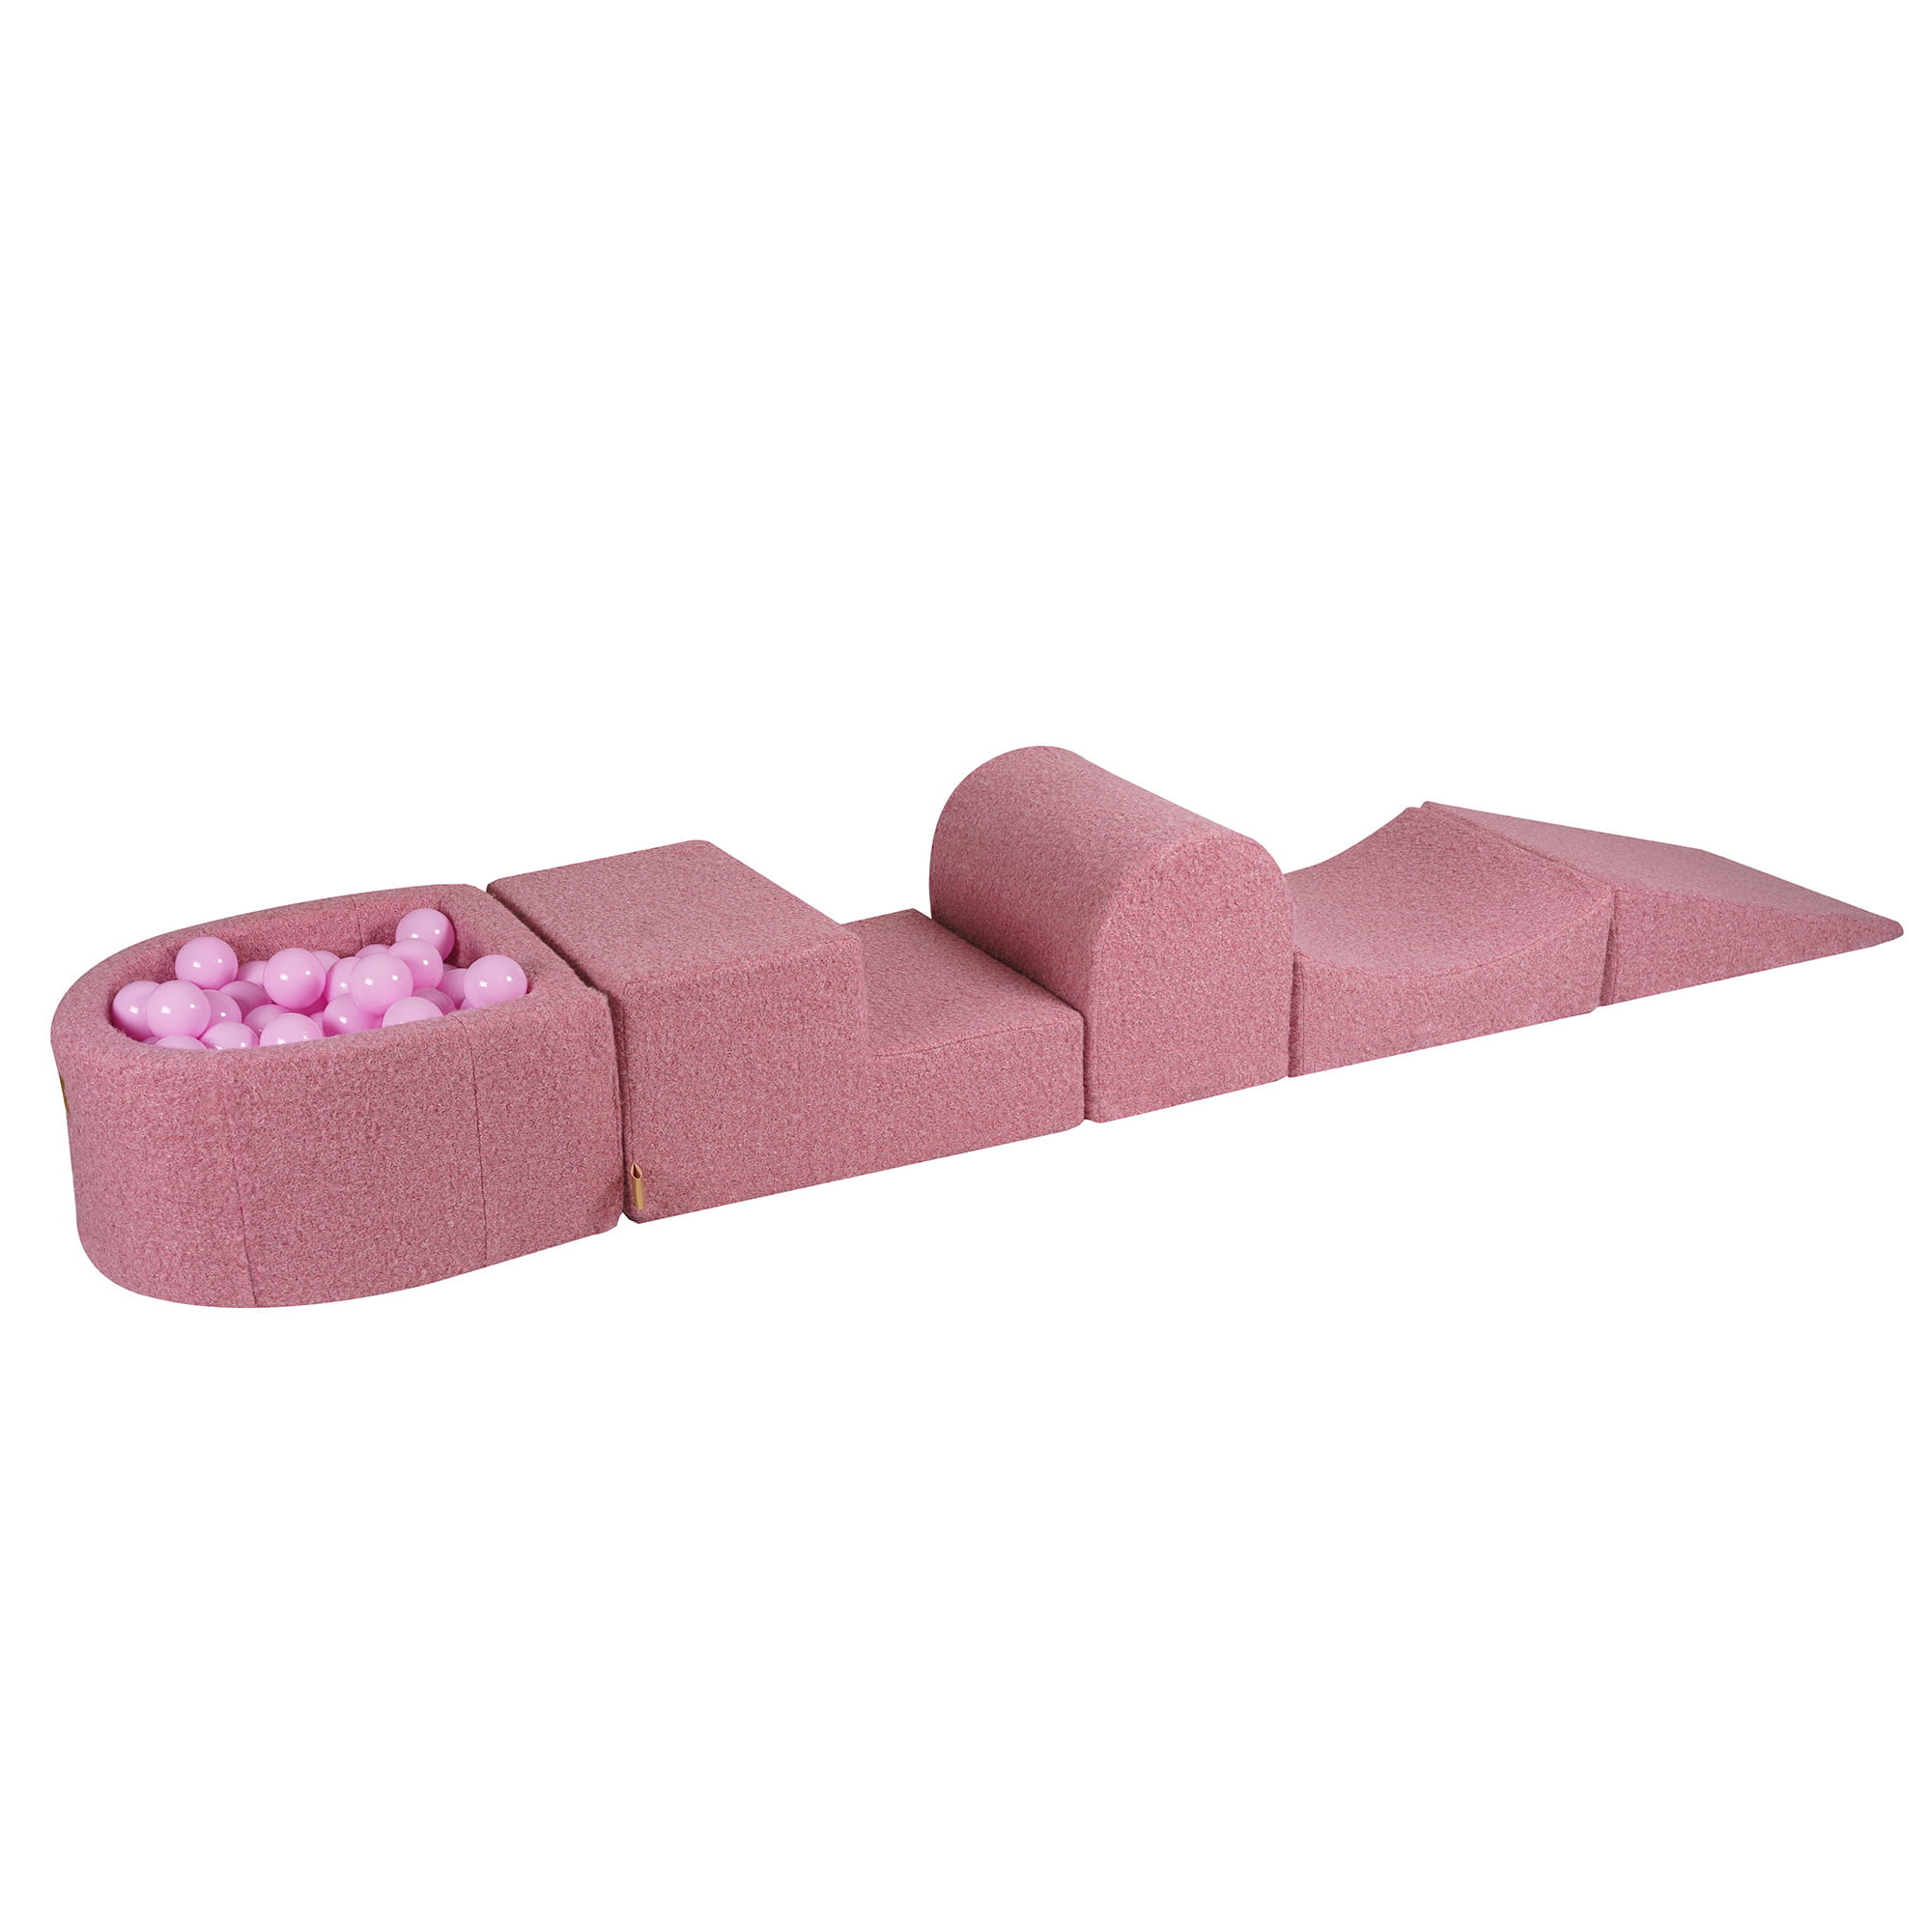 Meow, Pink buildable boucle playground with ball pit, 100 balls 